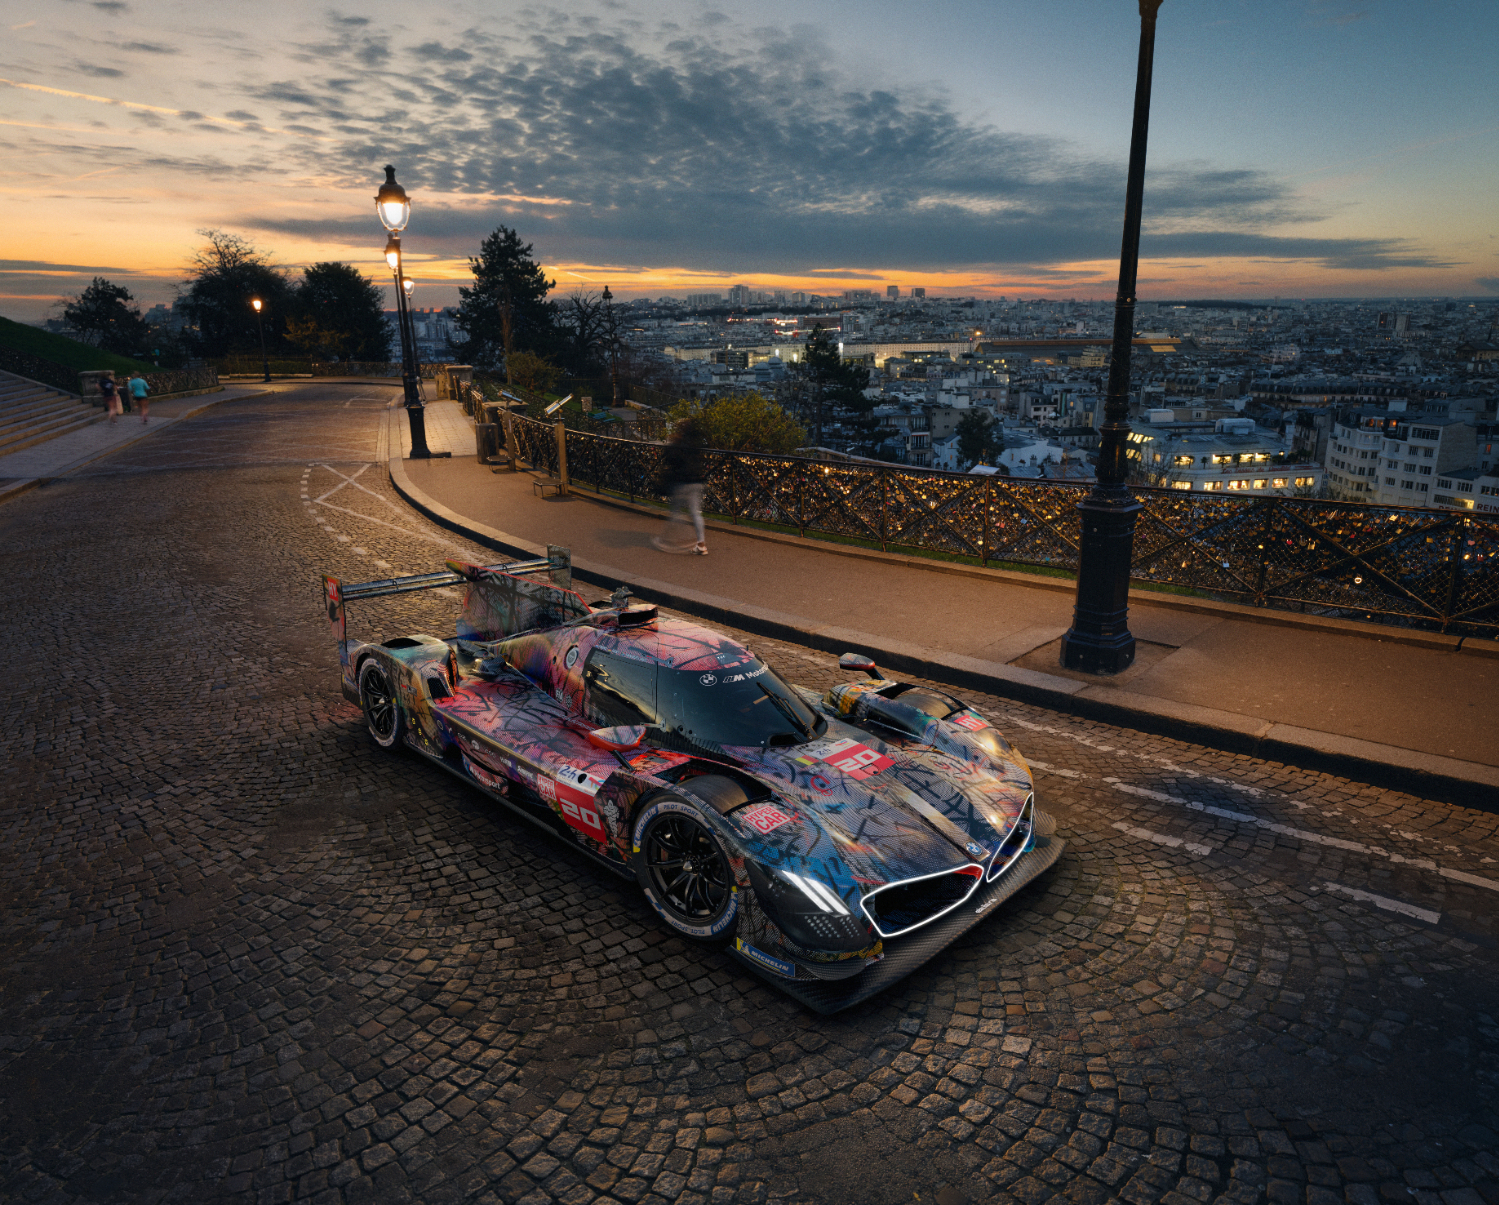 Race car on a cobblestone street in a city at sunset with city lights in the background. The car features a colorful, graffiti-style design